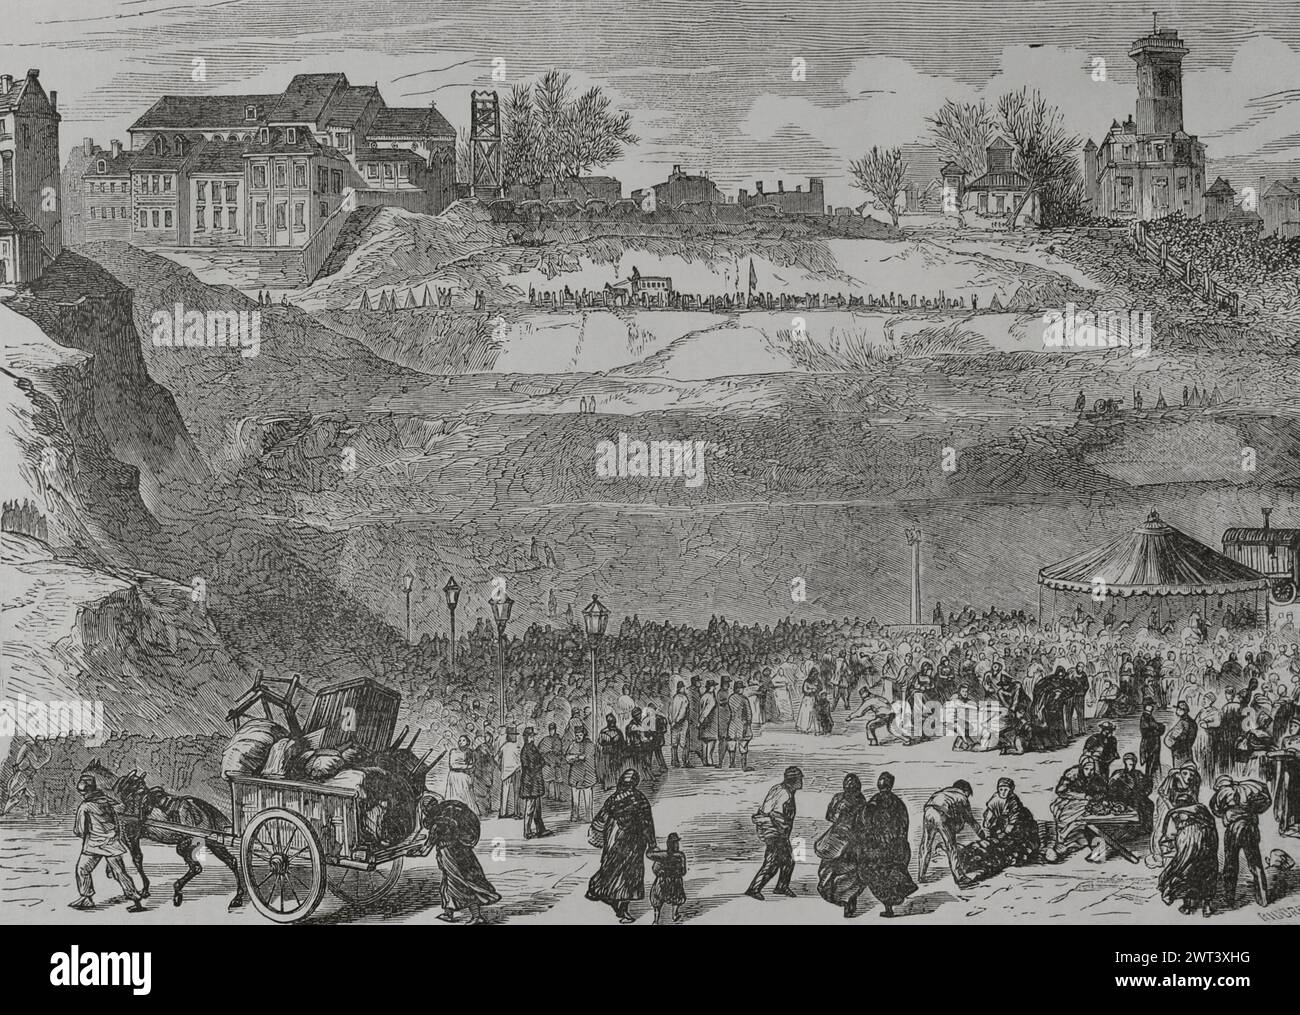 France. Paris Commune. Popular revolutionary movement that took power in Paris from 18 March to 28 May 1871, during the Franco-Prussian War. Positions occupied by the communards on the heights of Montmartre. Engraving by Ricord. 'Historia de la Guerra de Francia y Prusia' (History of the War between France and Prussia). Volume II. Published in Barcelona, 1871. Author: Manuel Ricord. 19th-century Spanish engraver. Stock Photo